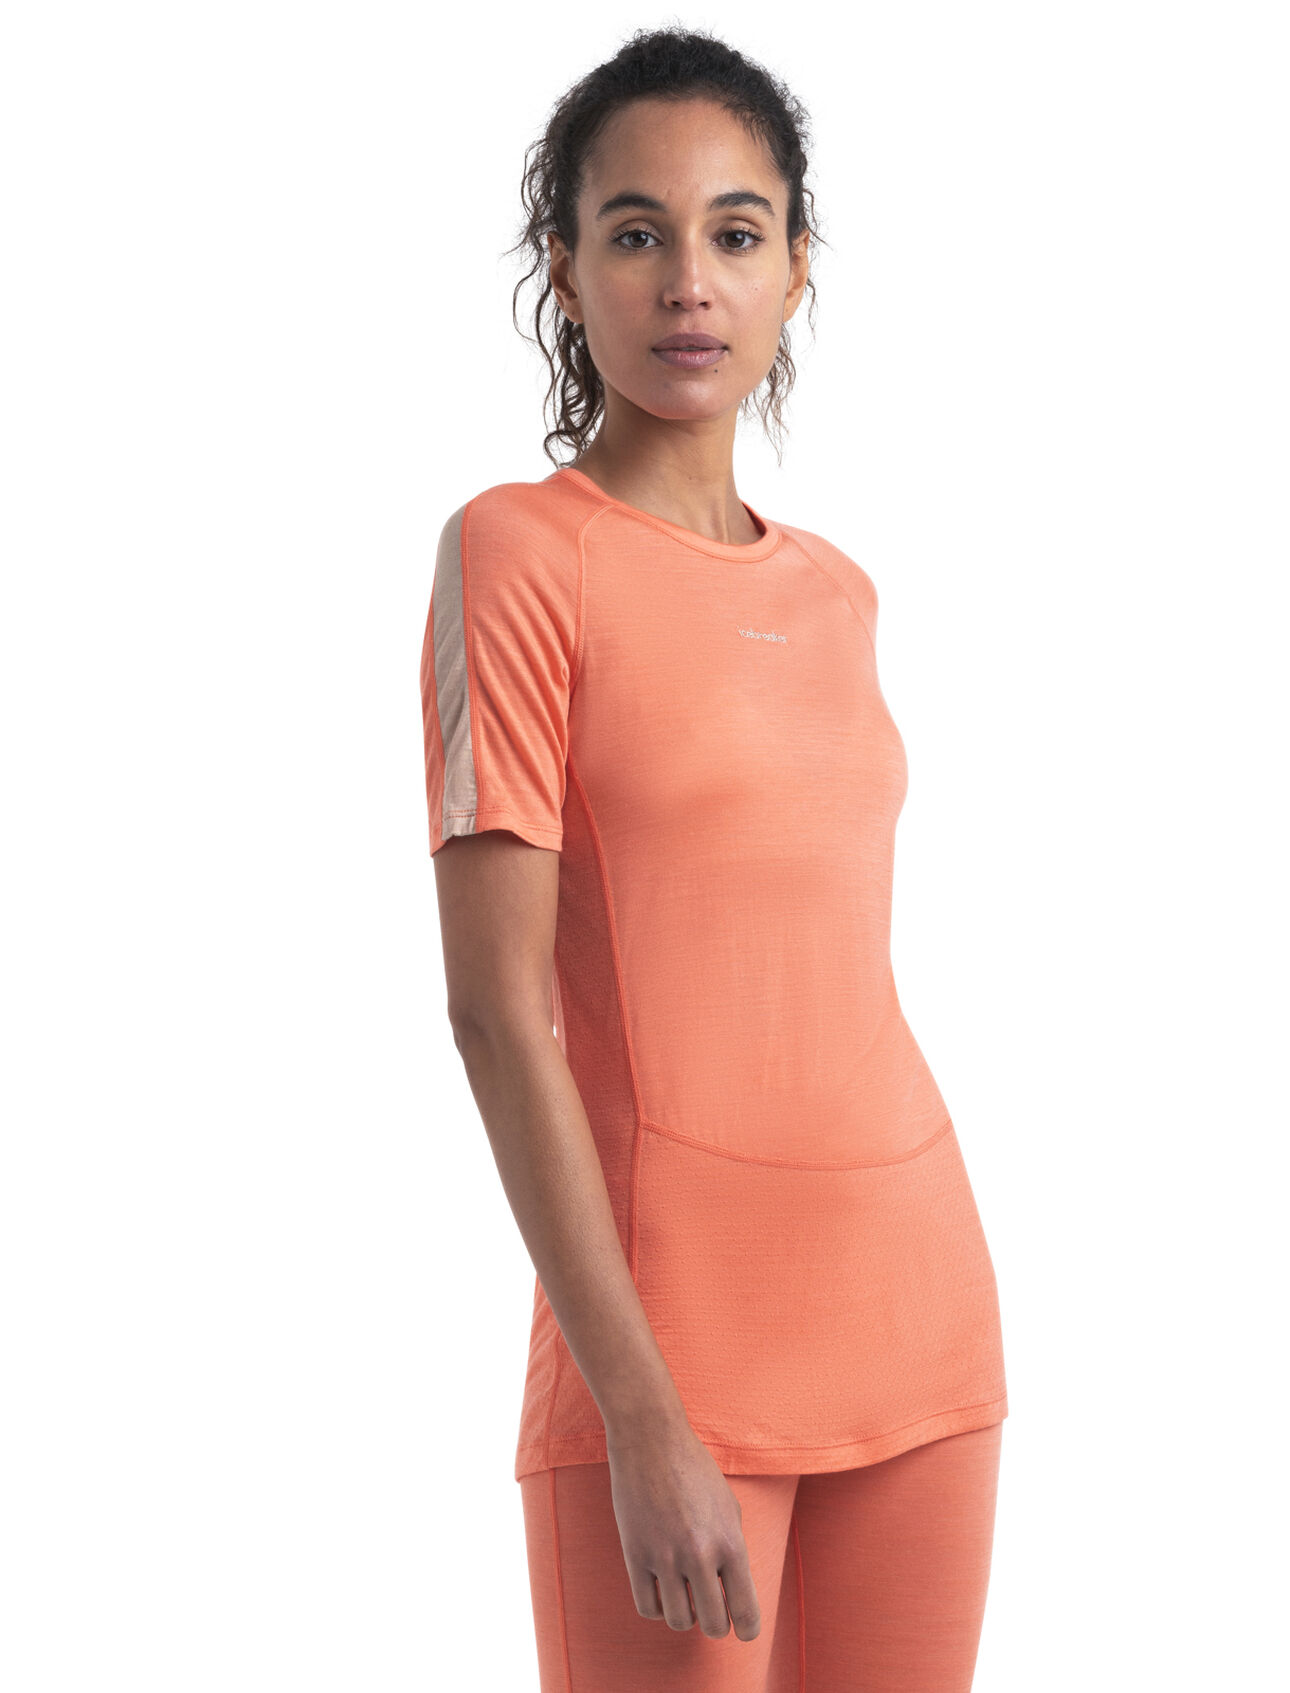 Womens 125 ZoneKnit™ Merino Blend Short Sleeve Crewe Thermal Top An ultralight merino base layer top designed to help regulate body temperature during high-intensity activity, the 125 ZoneKnit™ Short Sleeve Crewe features our jersey Cool-Lite™ fabric for adventure and everyday training.